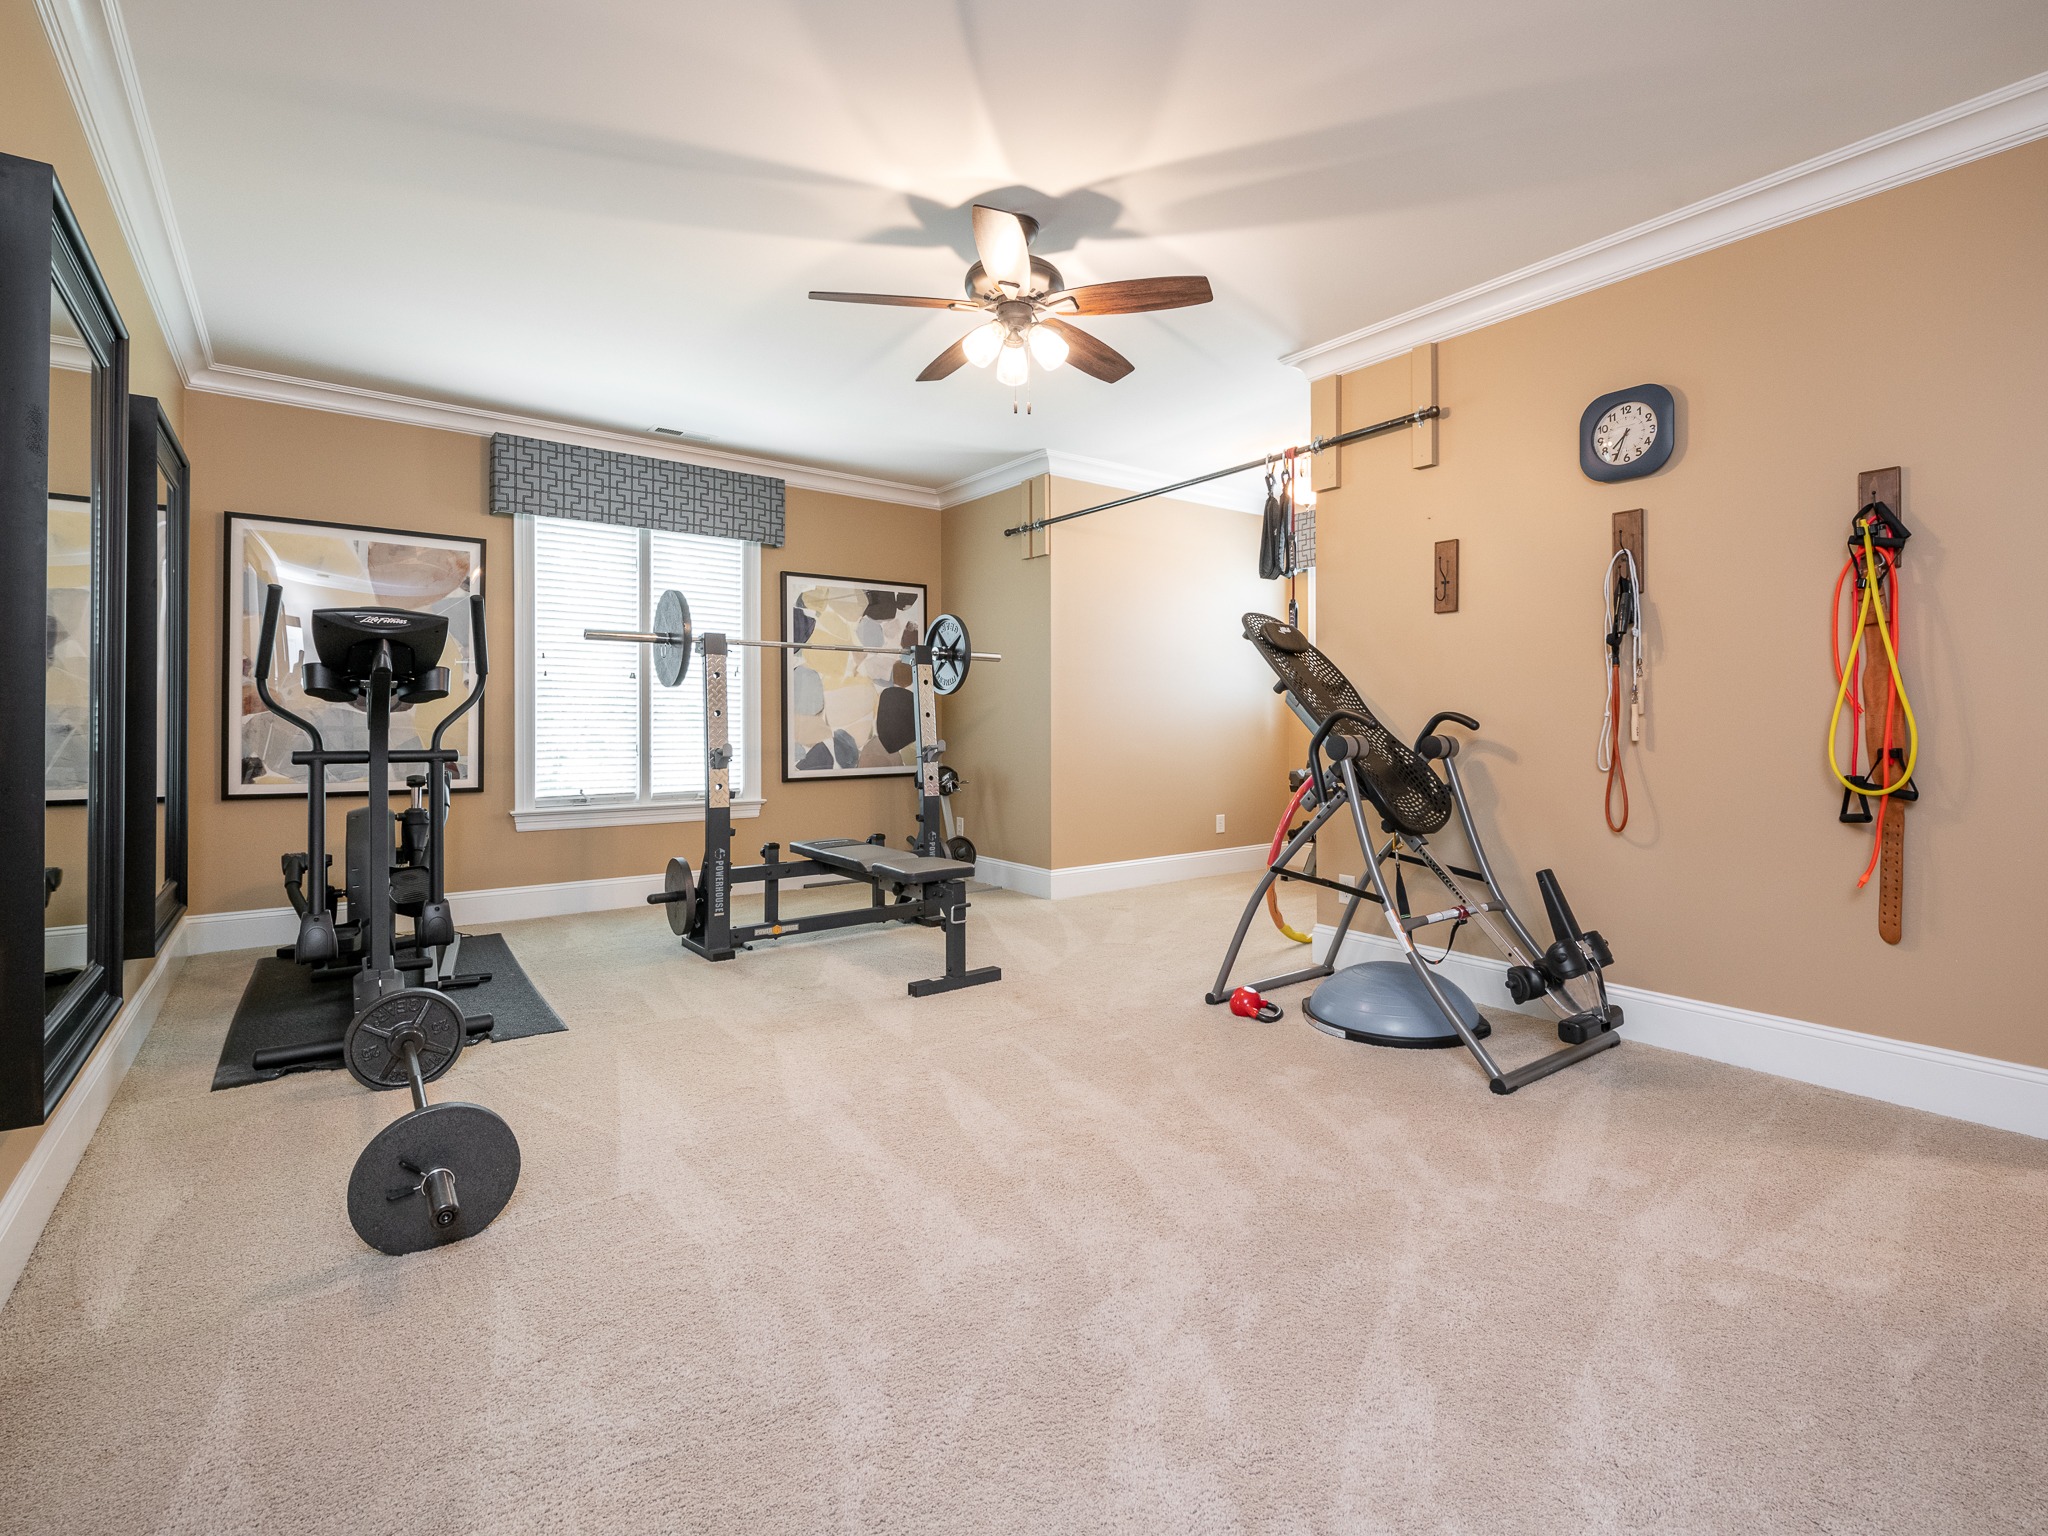 Exercise room currently set up in Bedroom #4